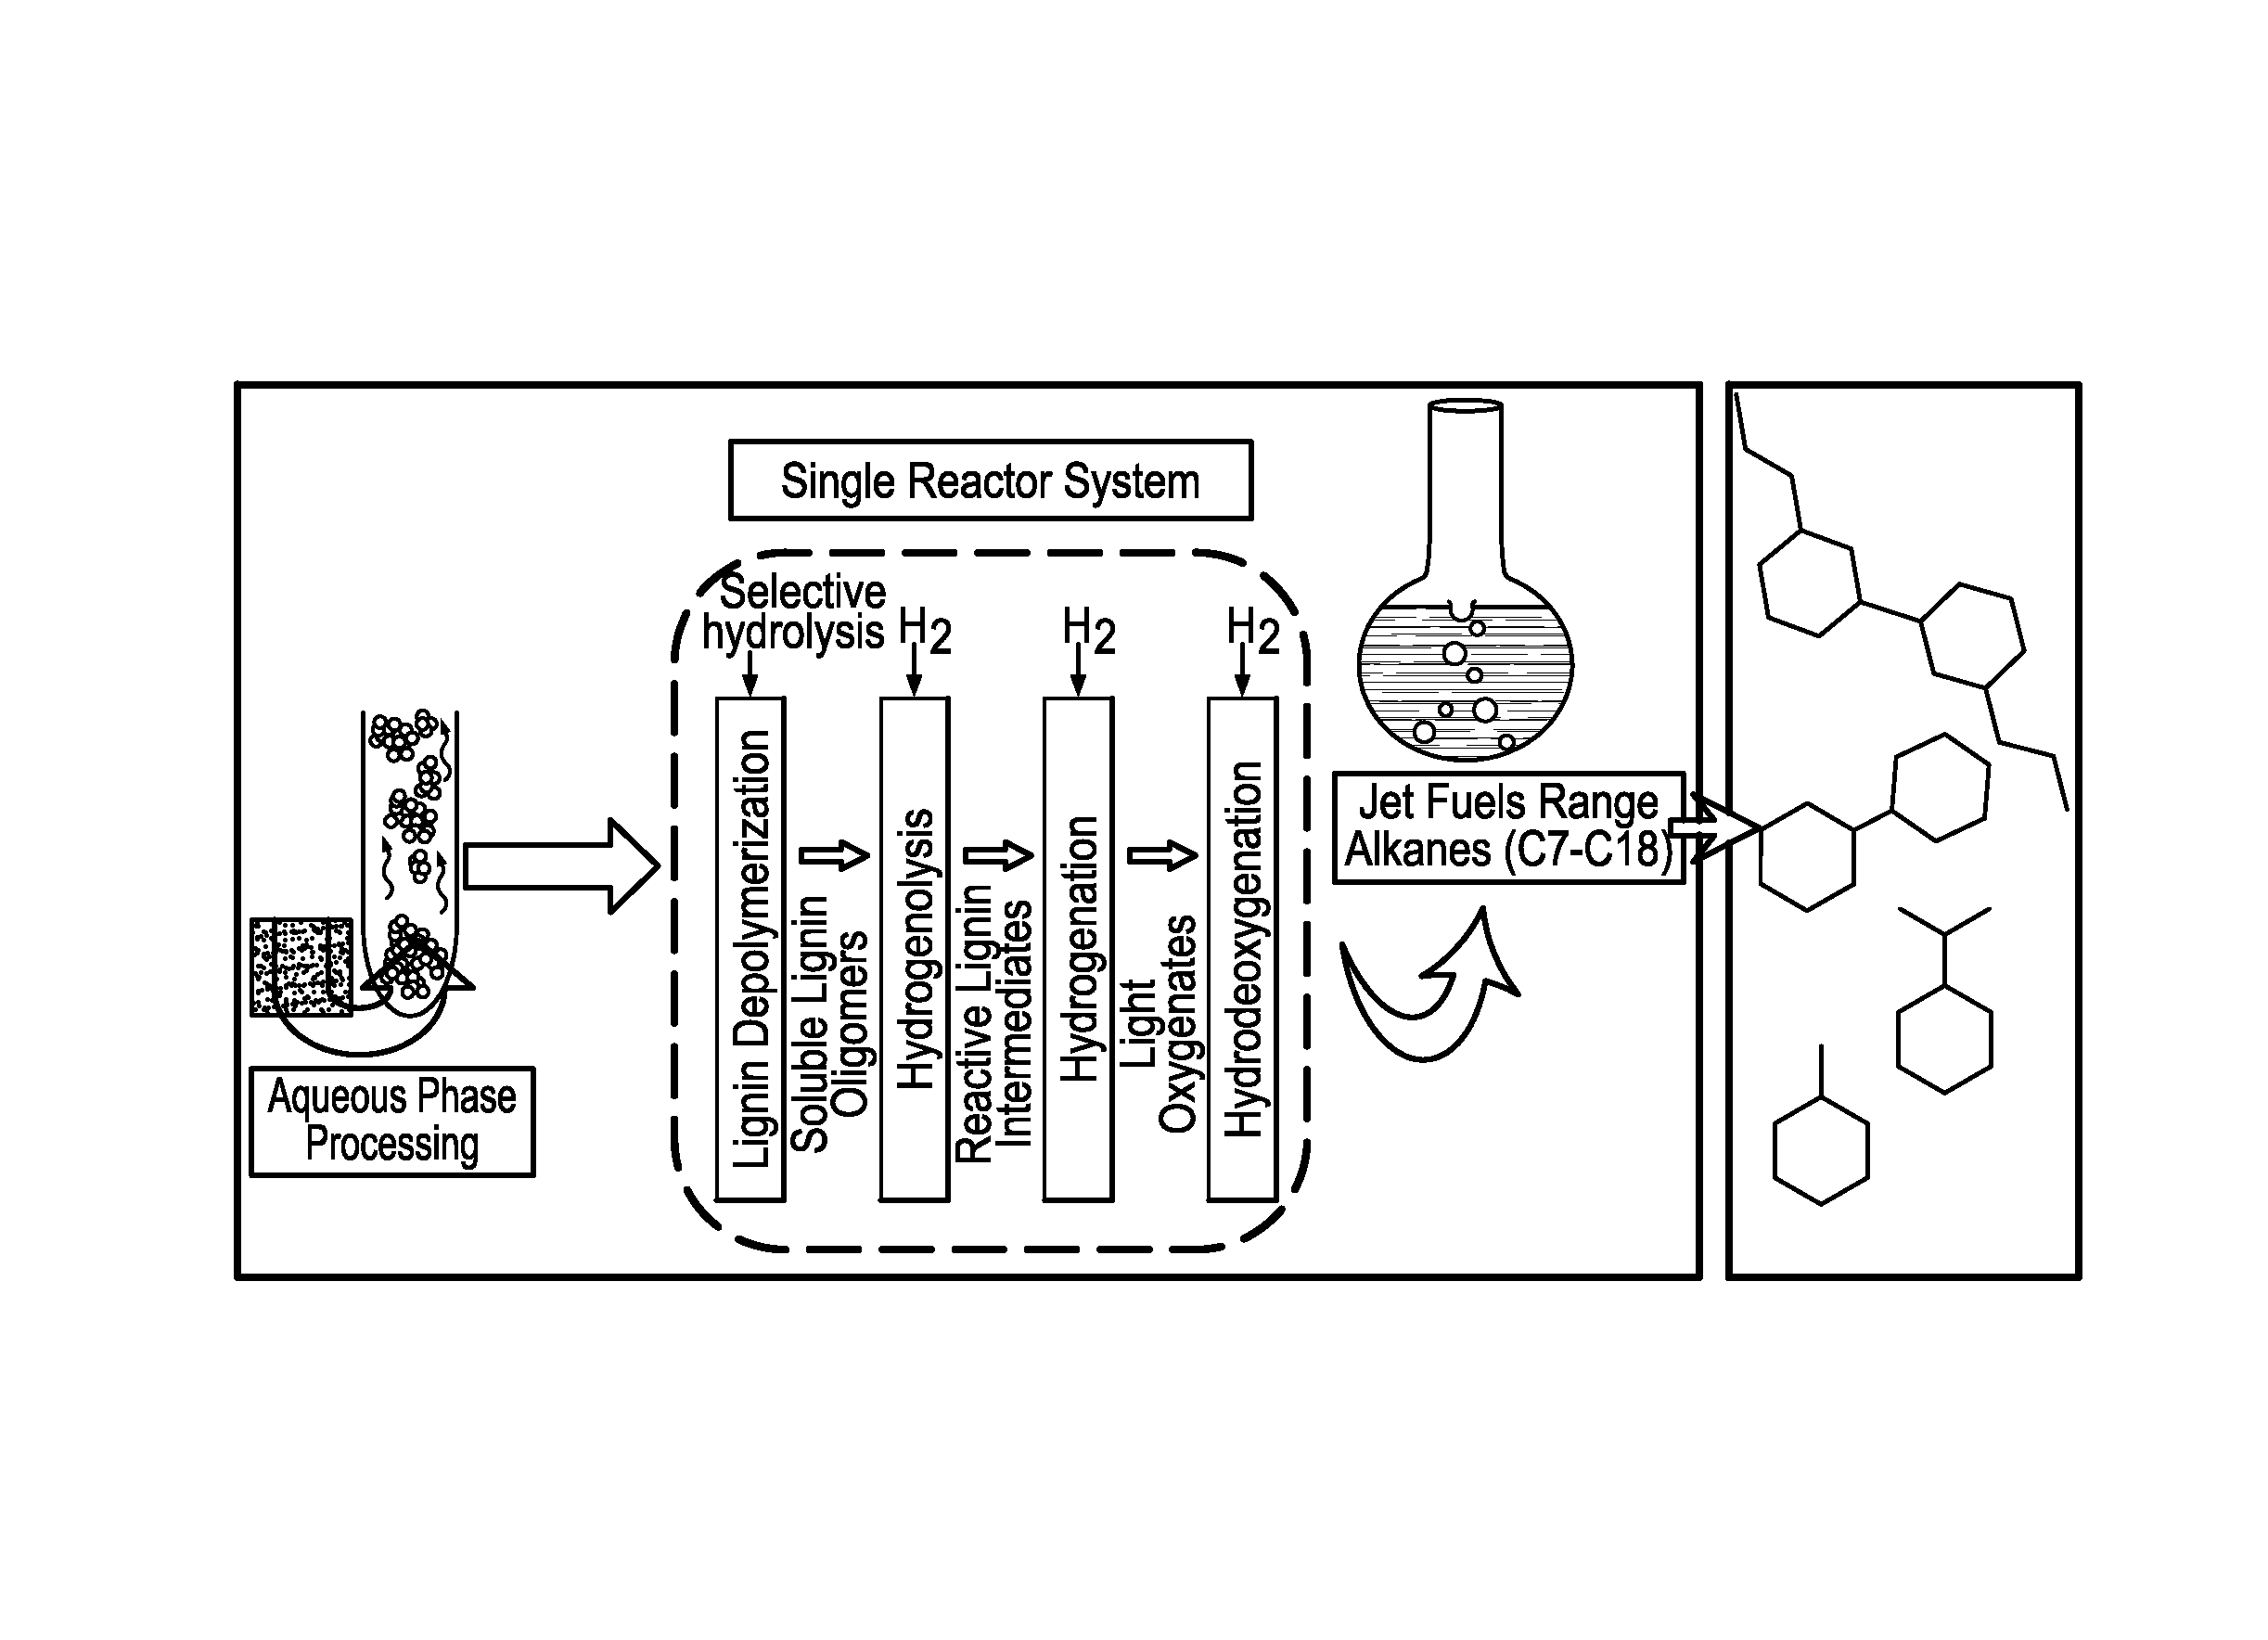 Apparatus and process for preparing reactive lignin with high yield from plant biomass for production of fuels and chemicals